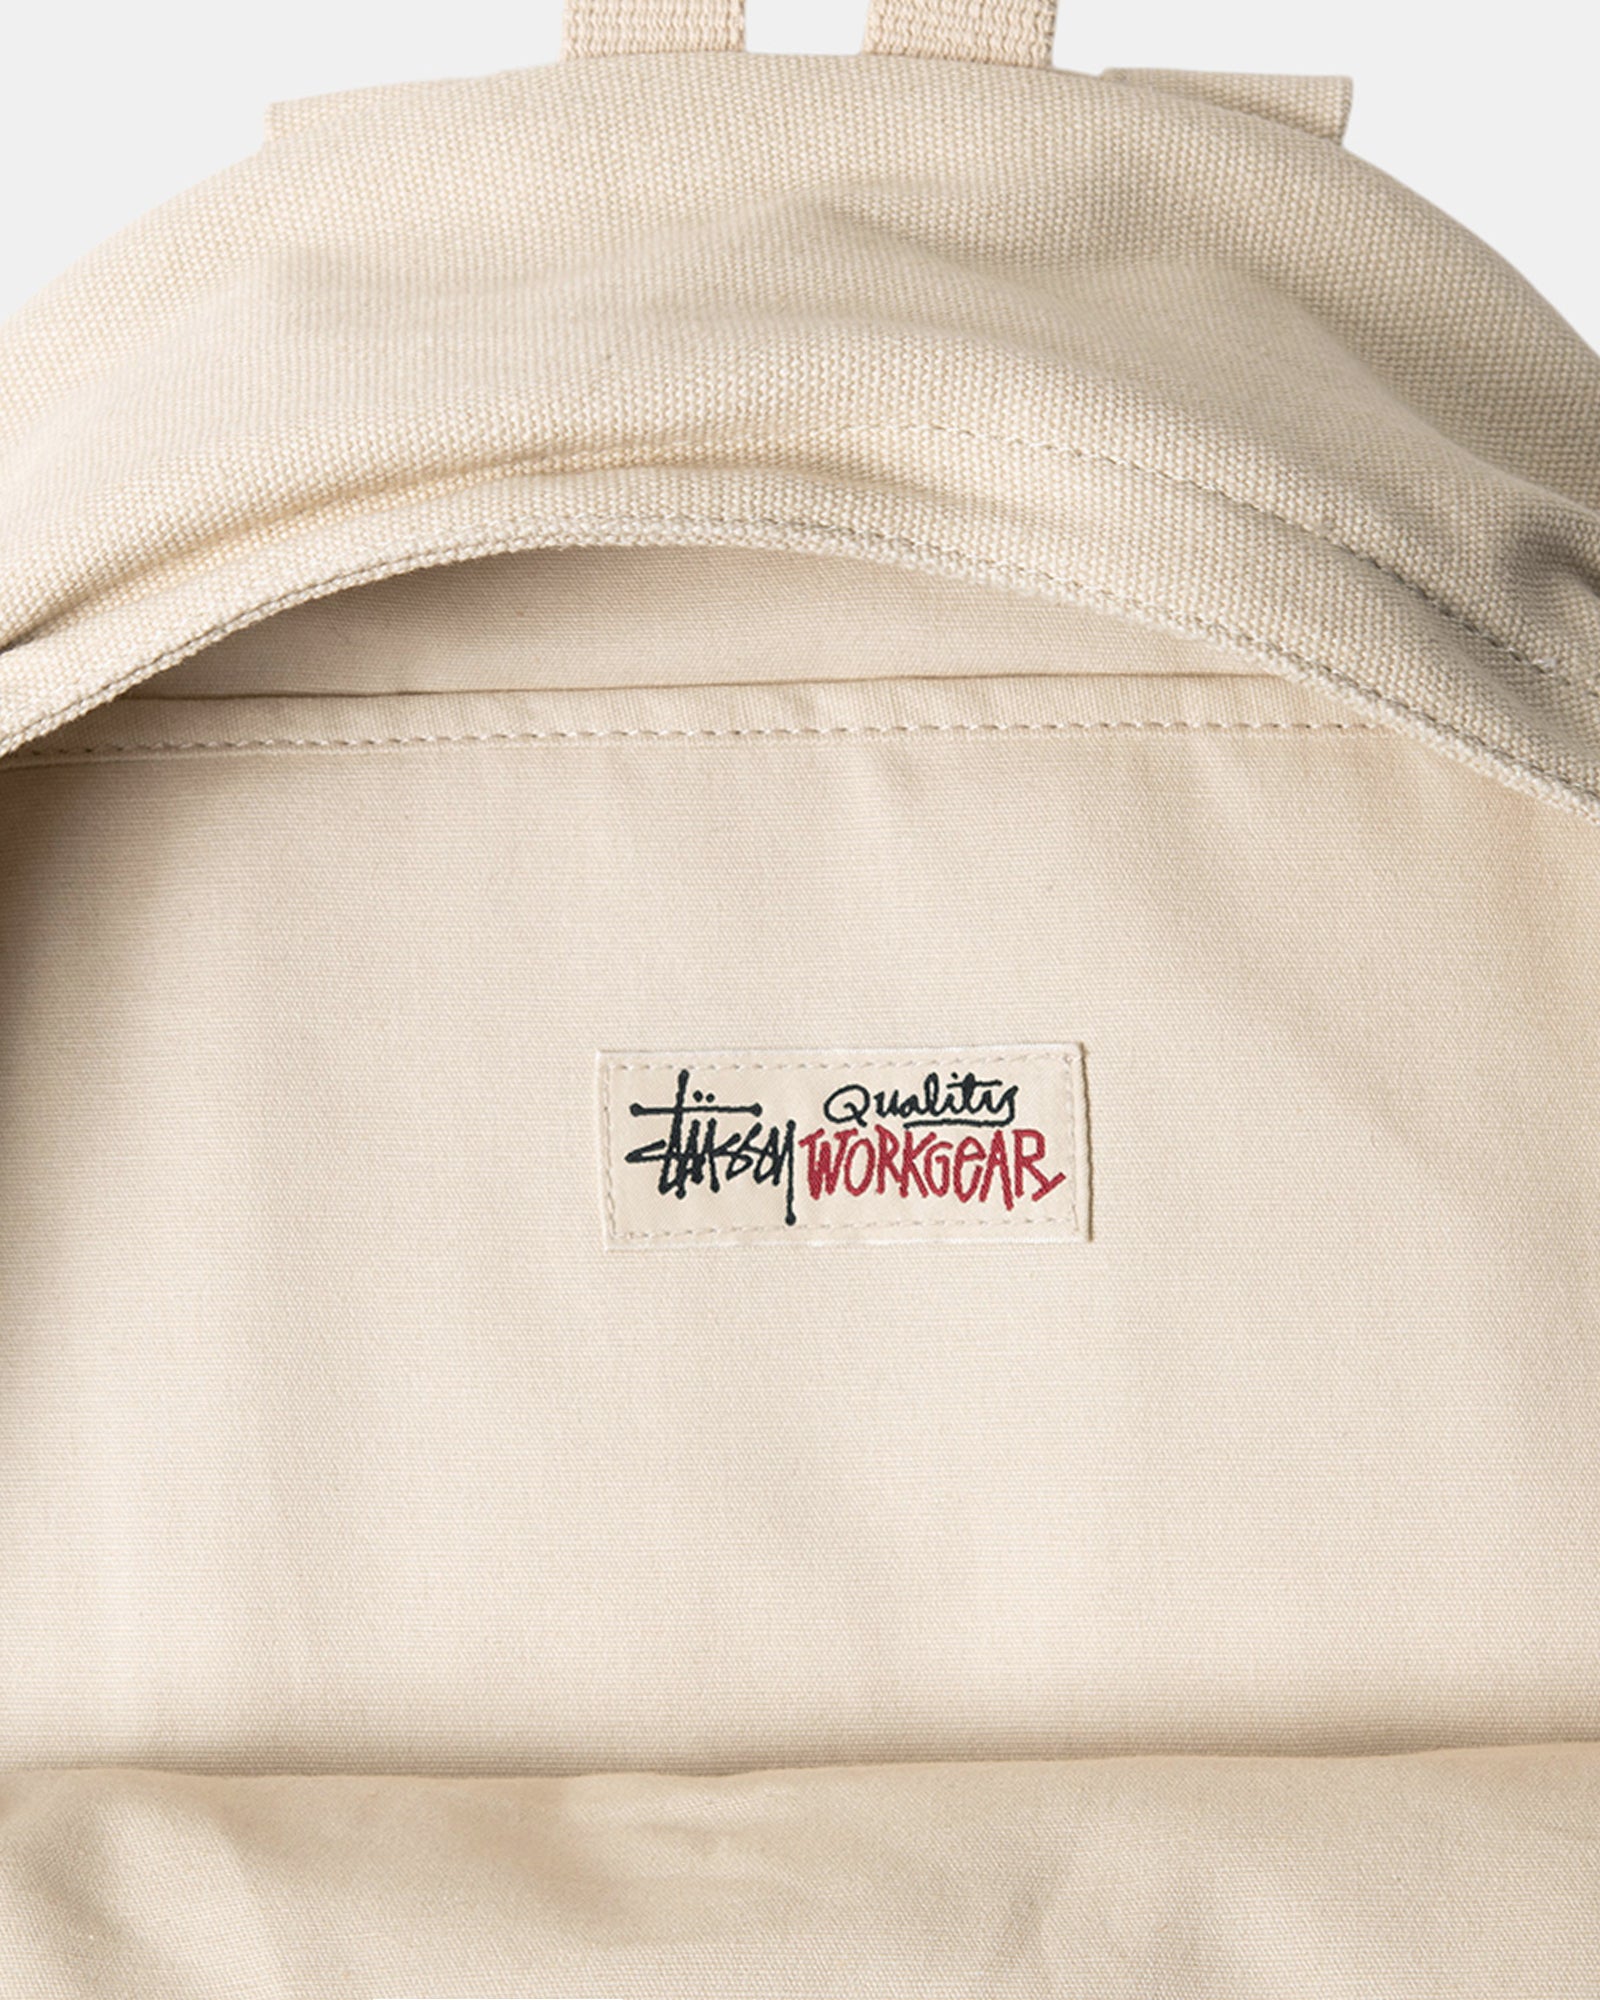 Stüssy Canvas Backpack Natural Accessories